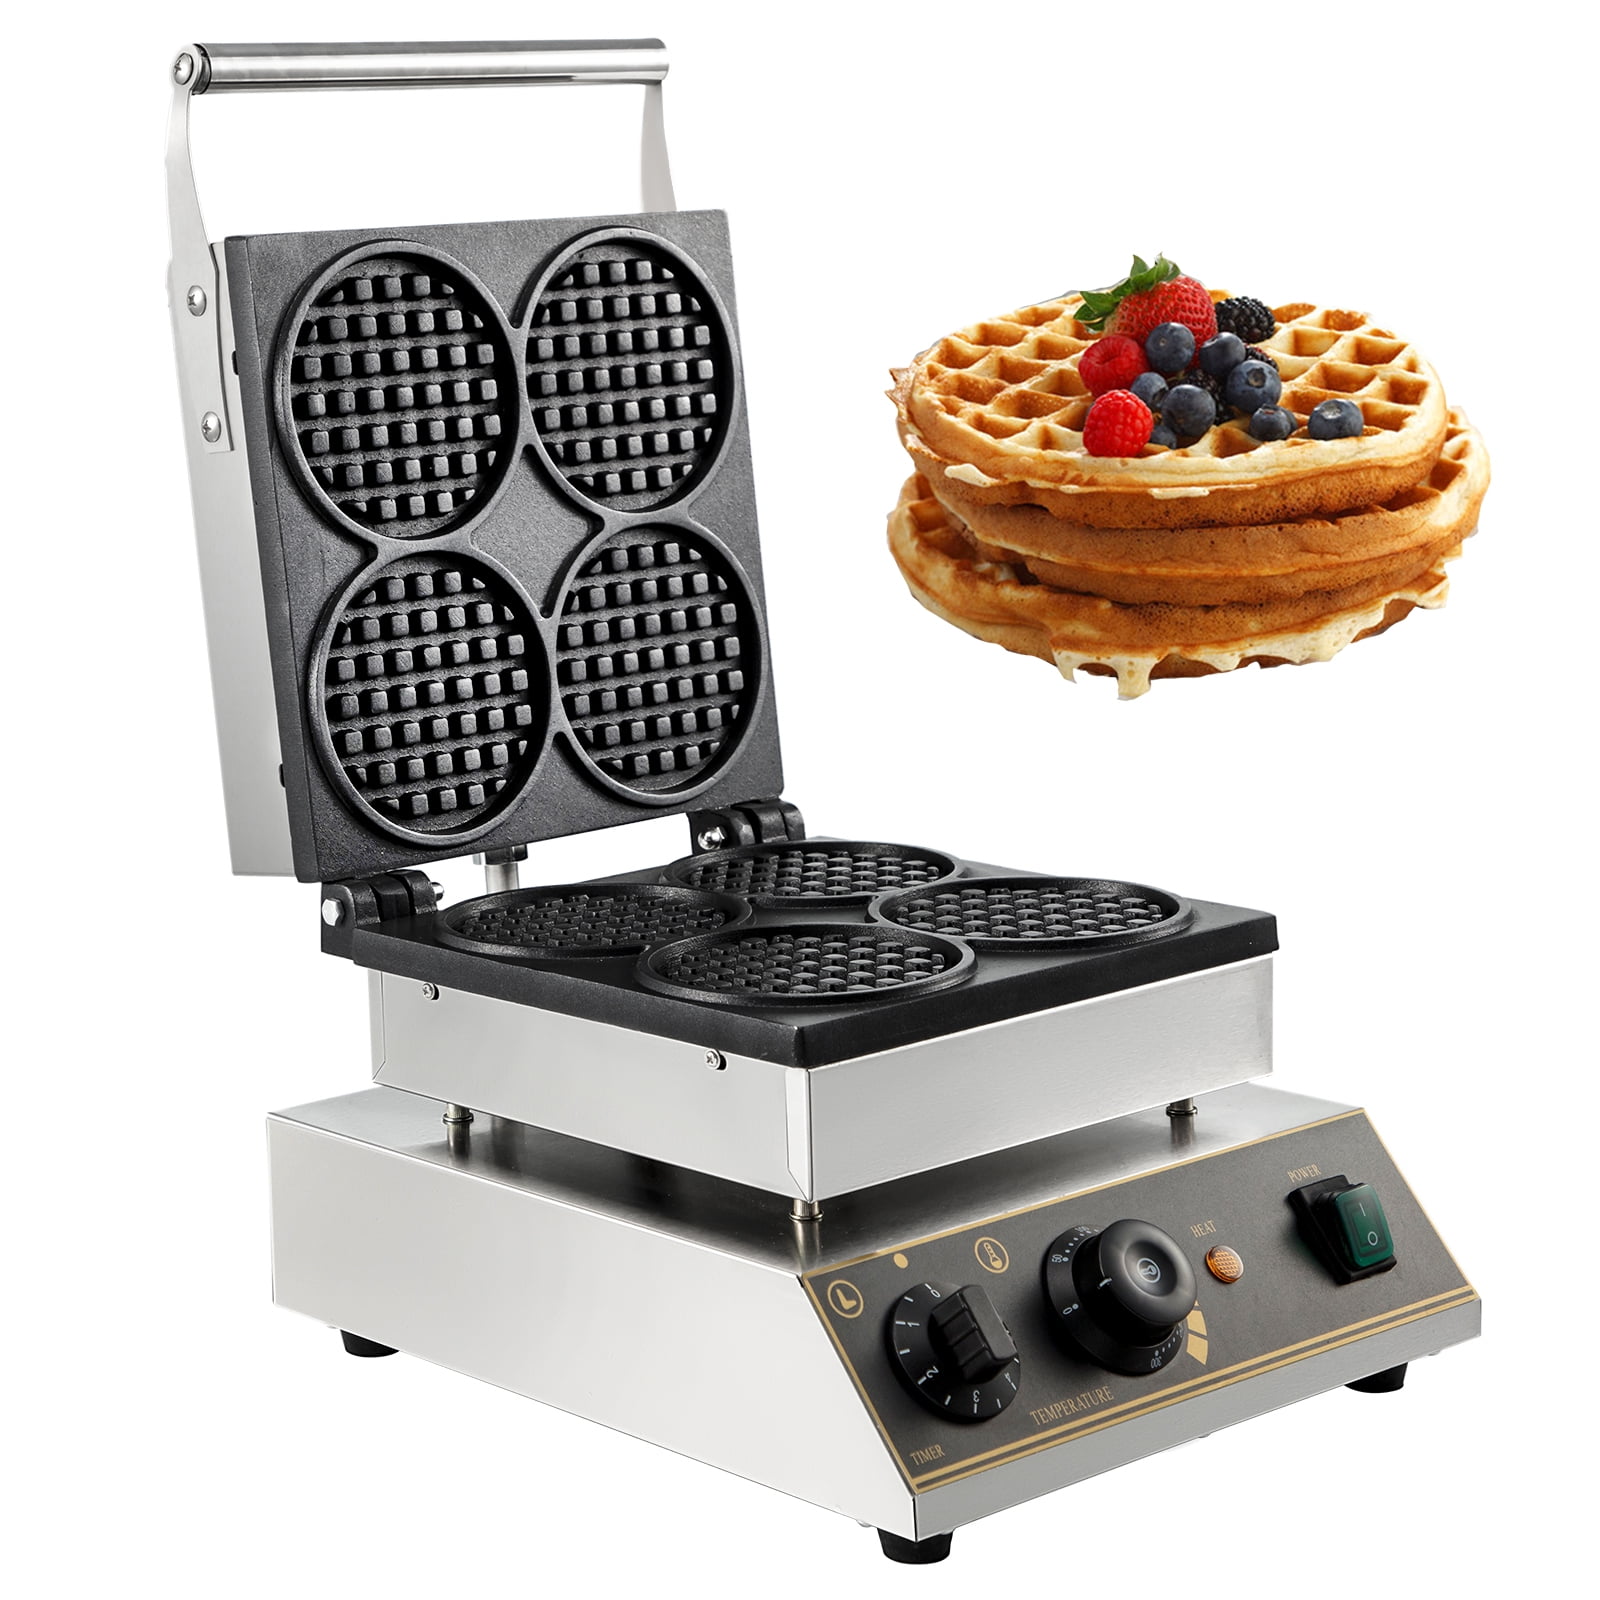 Cuisinart Classic Waffle Maker – The Gilded Carriage